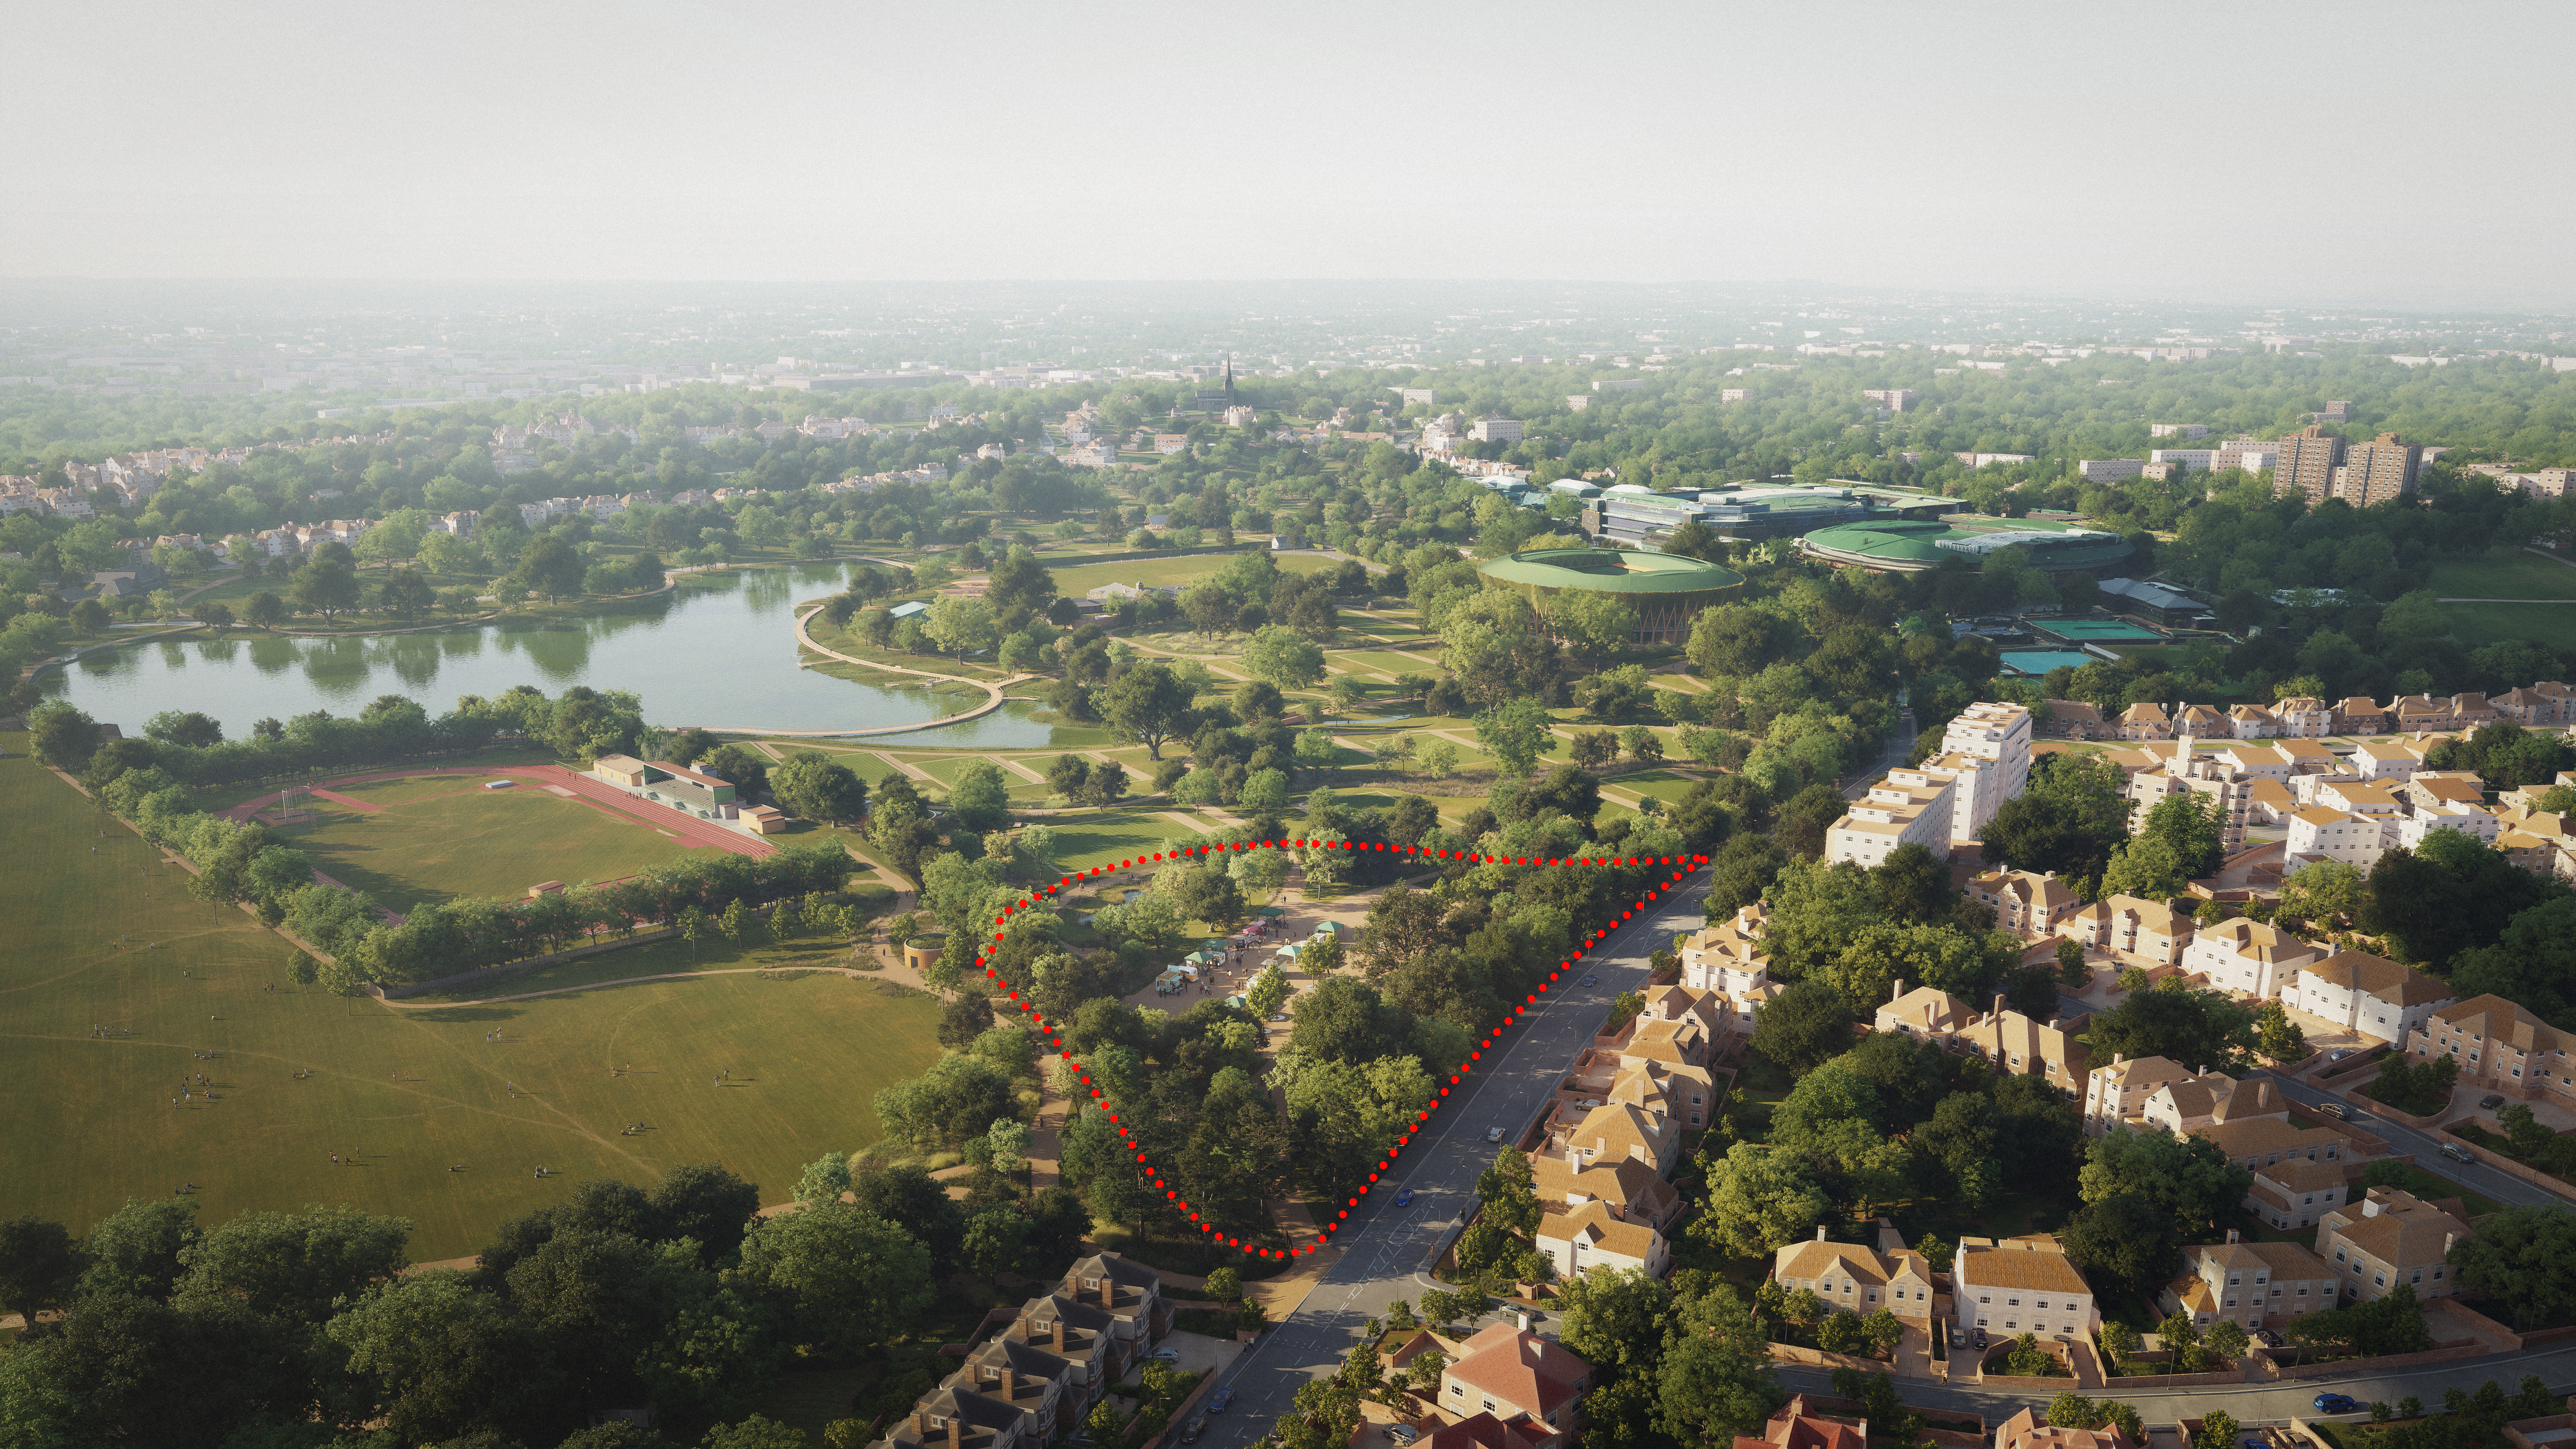 An image showing the new proposed parkland 